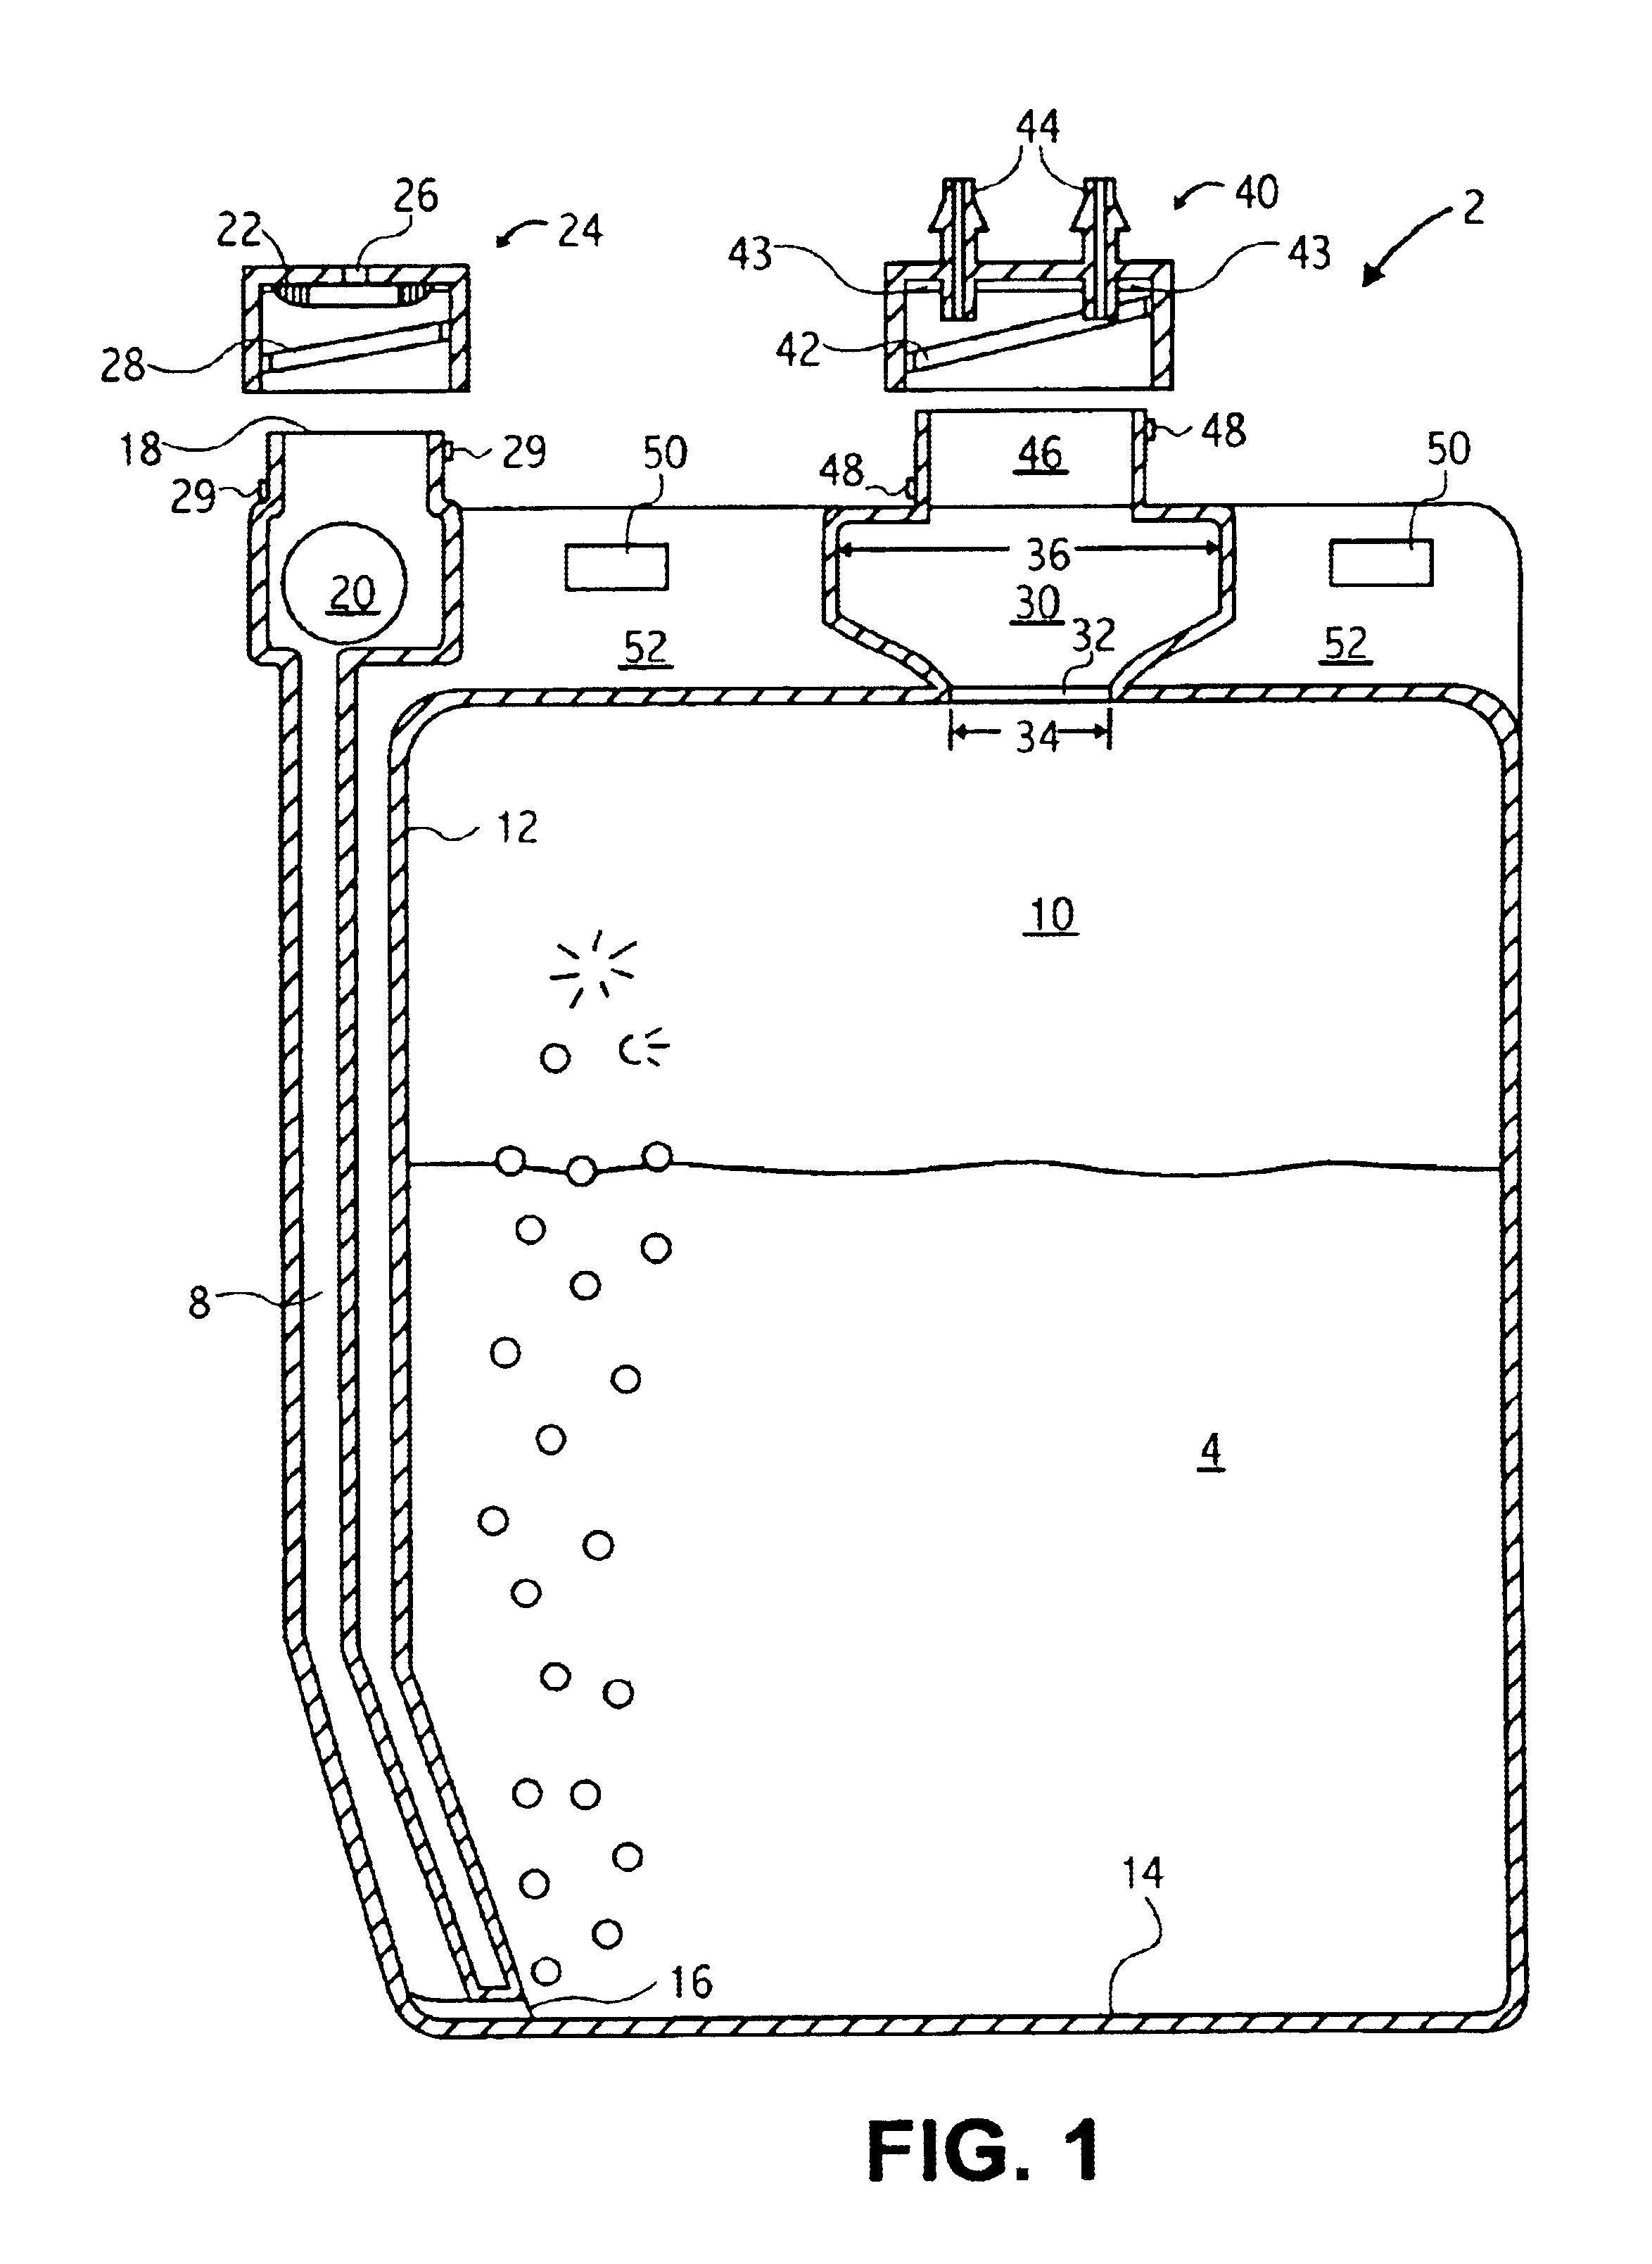 Delivery system for liquid catalysts